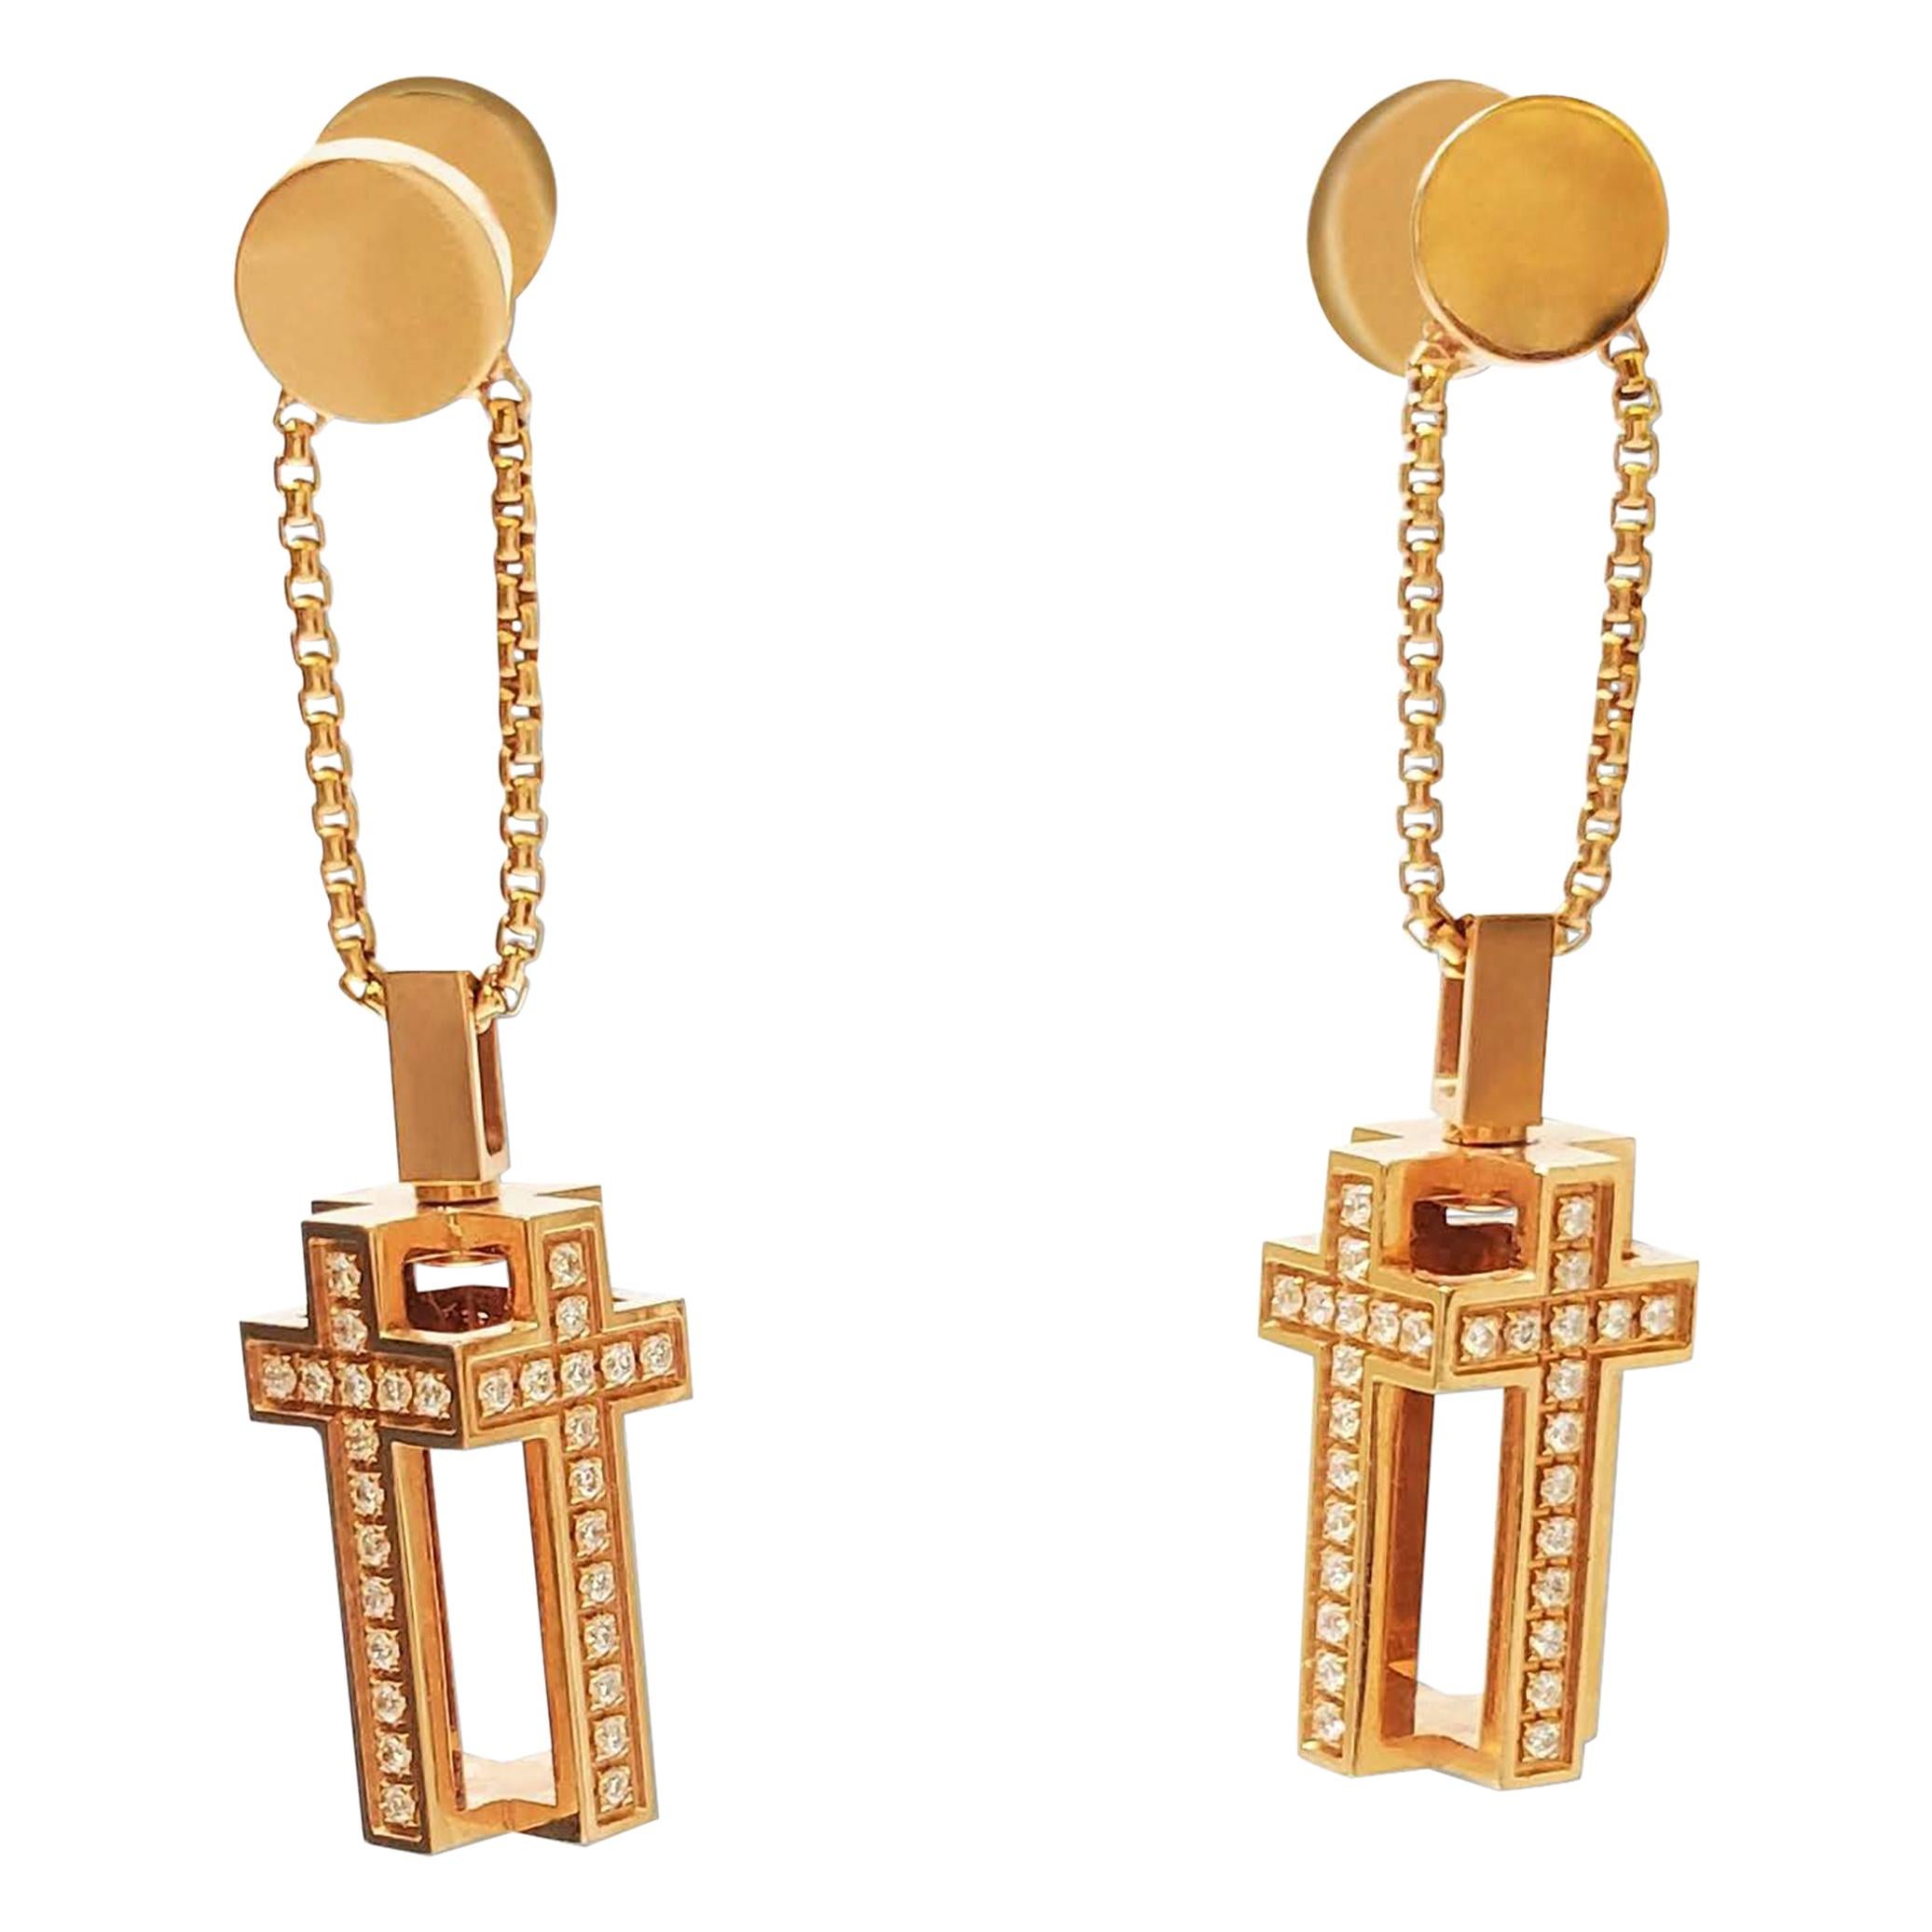 Roger Dubuis 'Follow Me' Gold and Diamond Earrings